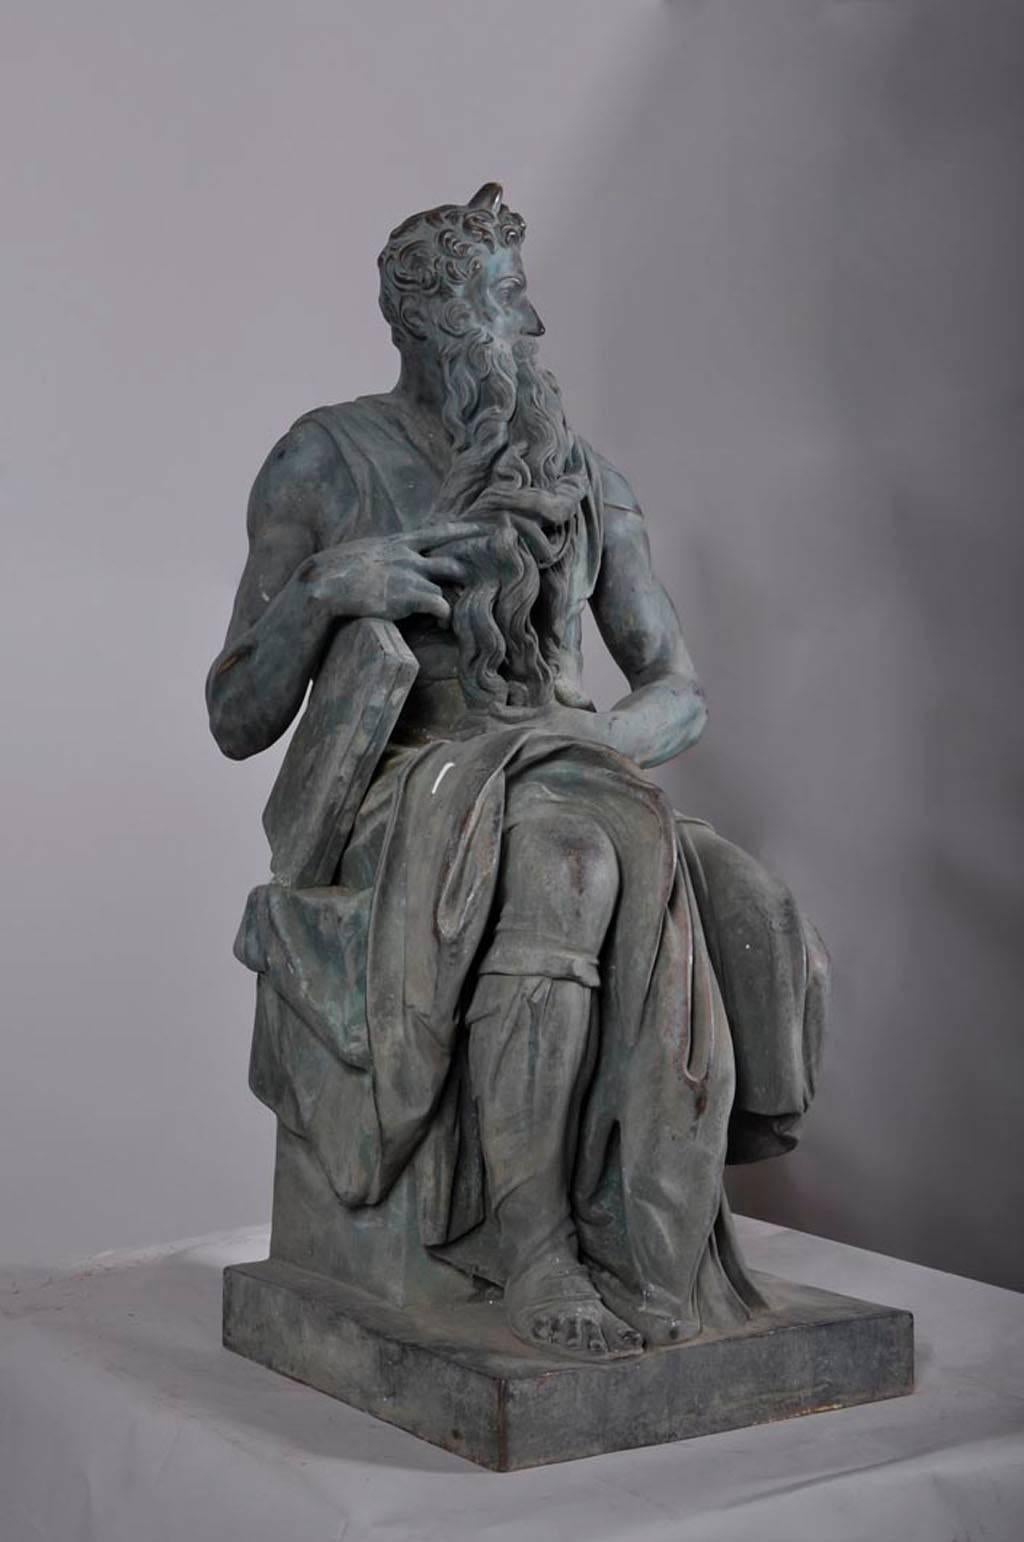 The bronze has a beautiful green patina .
It represents Moses with the tablets of stone.
This statue is made after the Michelangelo's Moses we can see in the Tomb of Pope Julius II in Roma.
Period 19th century.